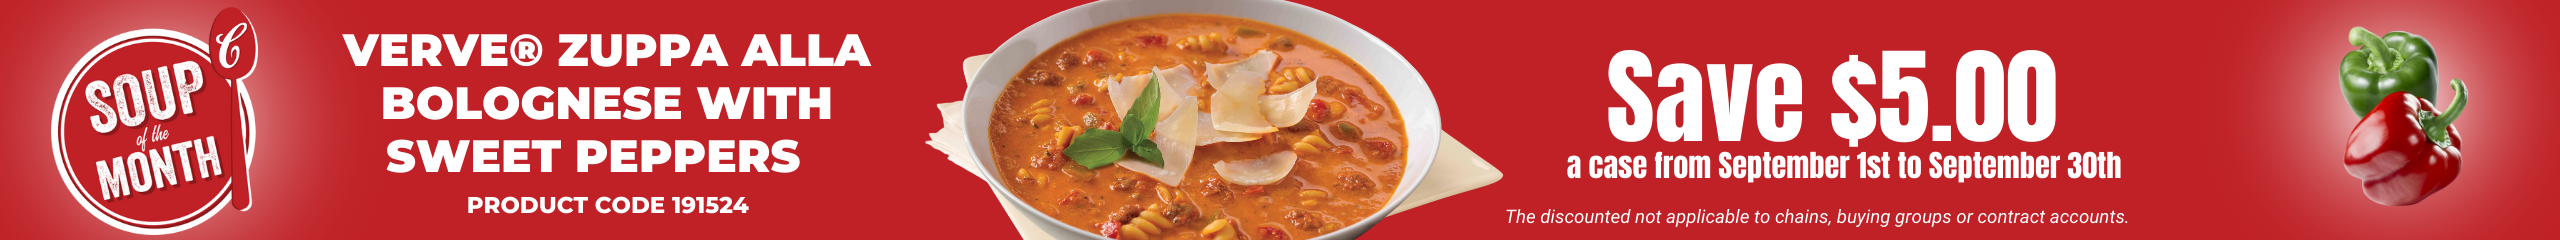 Campbells Soup of the Month Zuppa Alla Bolognese